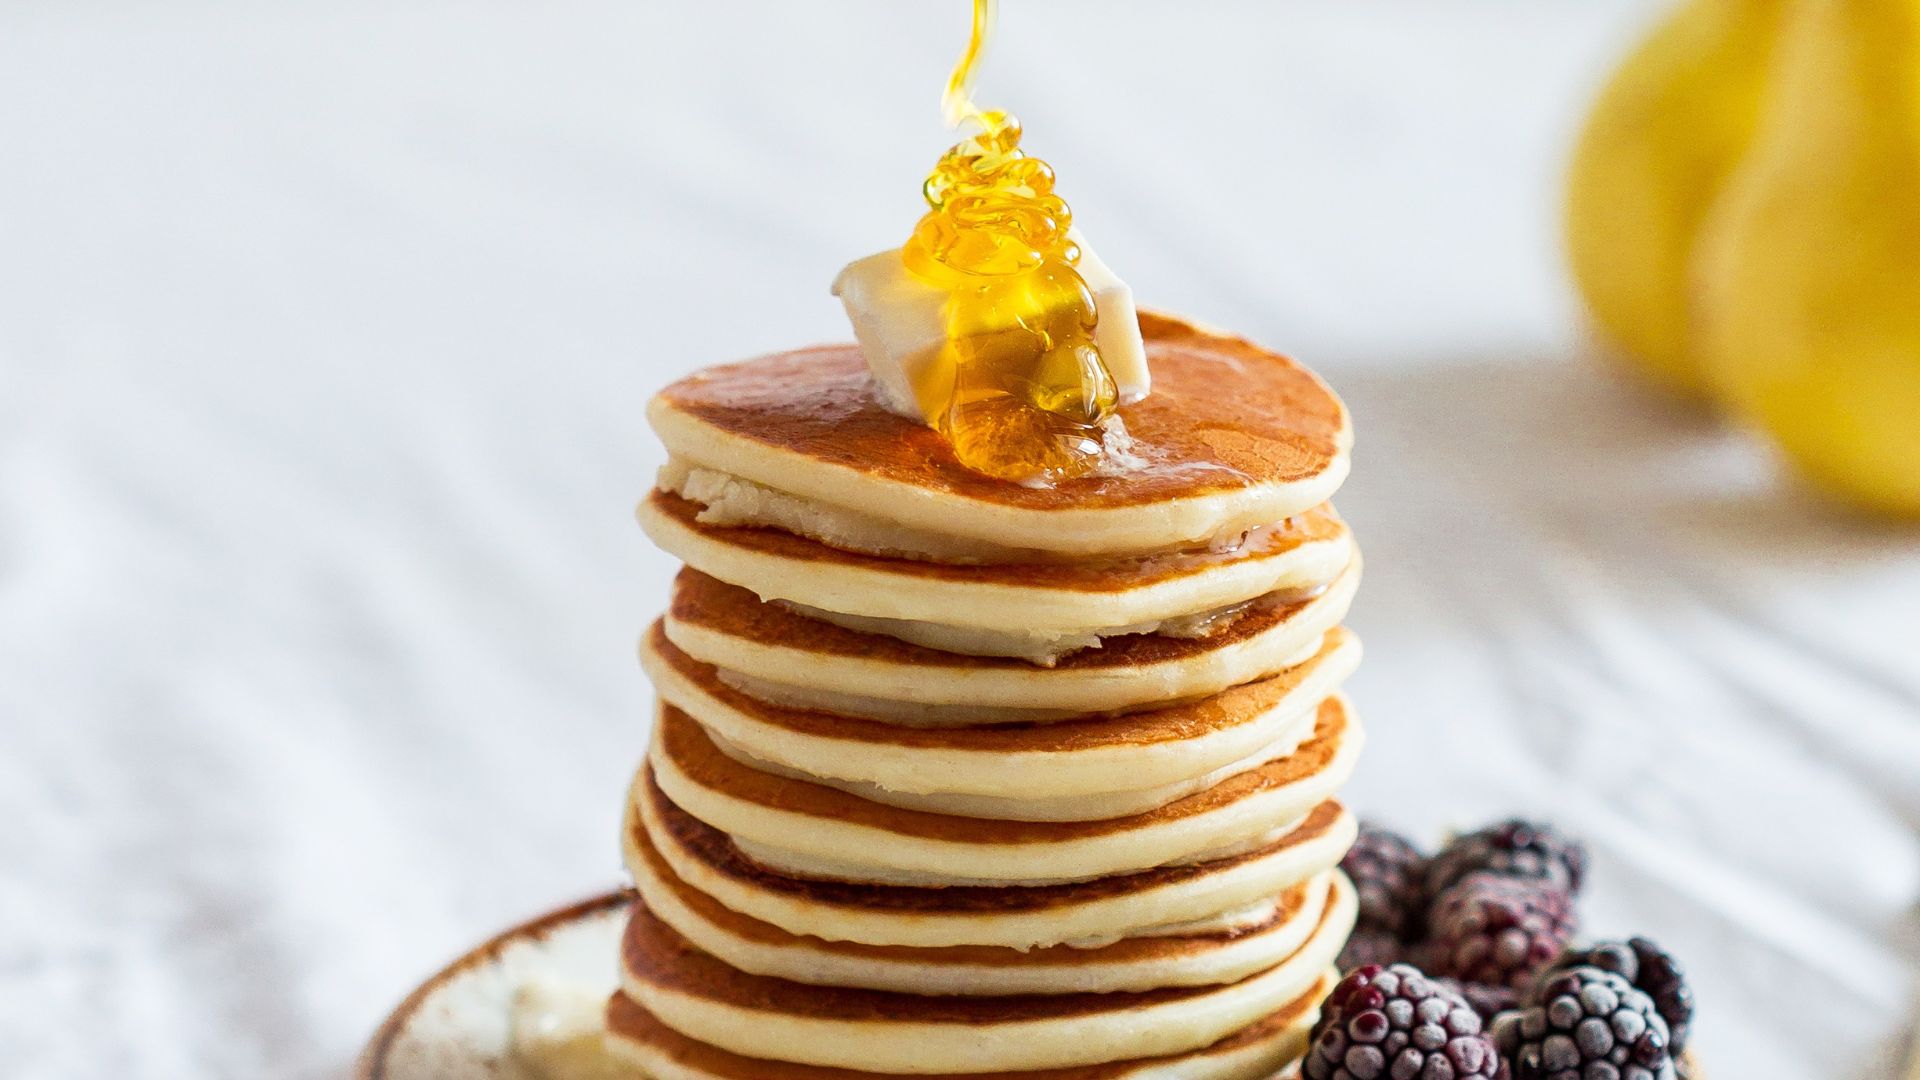 Is Your Enthusiasm As Flat as a Pancake? Discover 12 Tips To Stay Motivated at Work